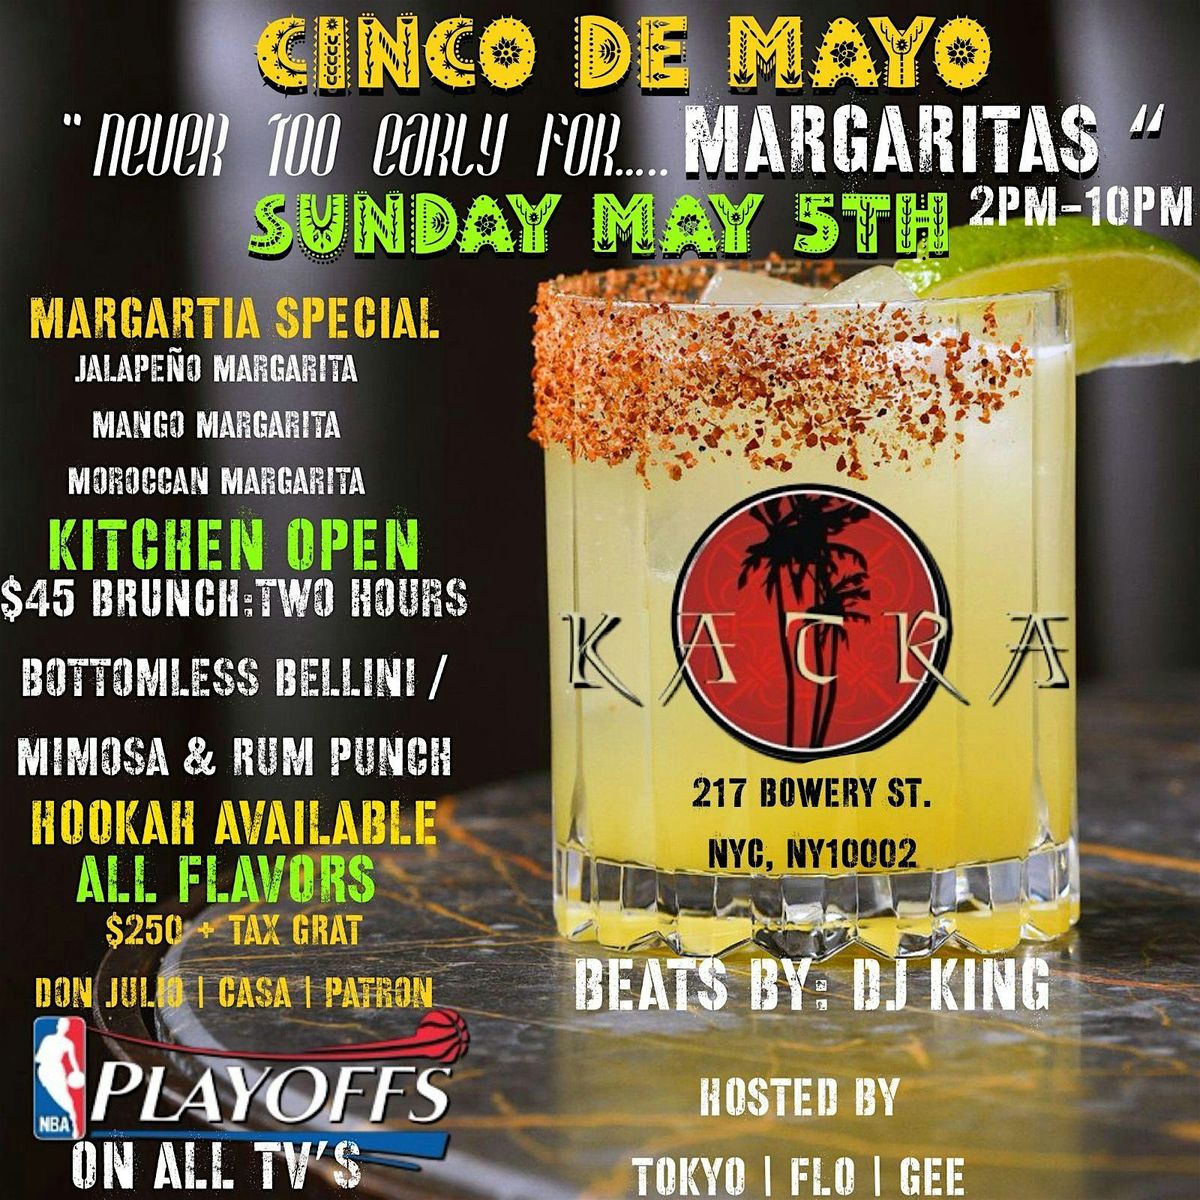 "IT'S NEVER TOO EARLY FOR A MARGARITA" CINCO DE MAYO CELEBRATION